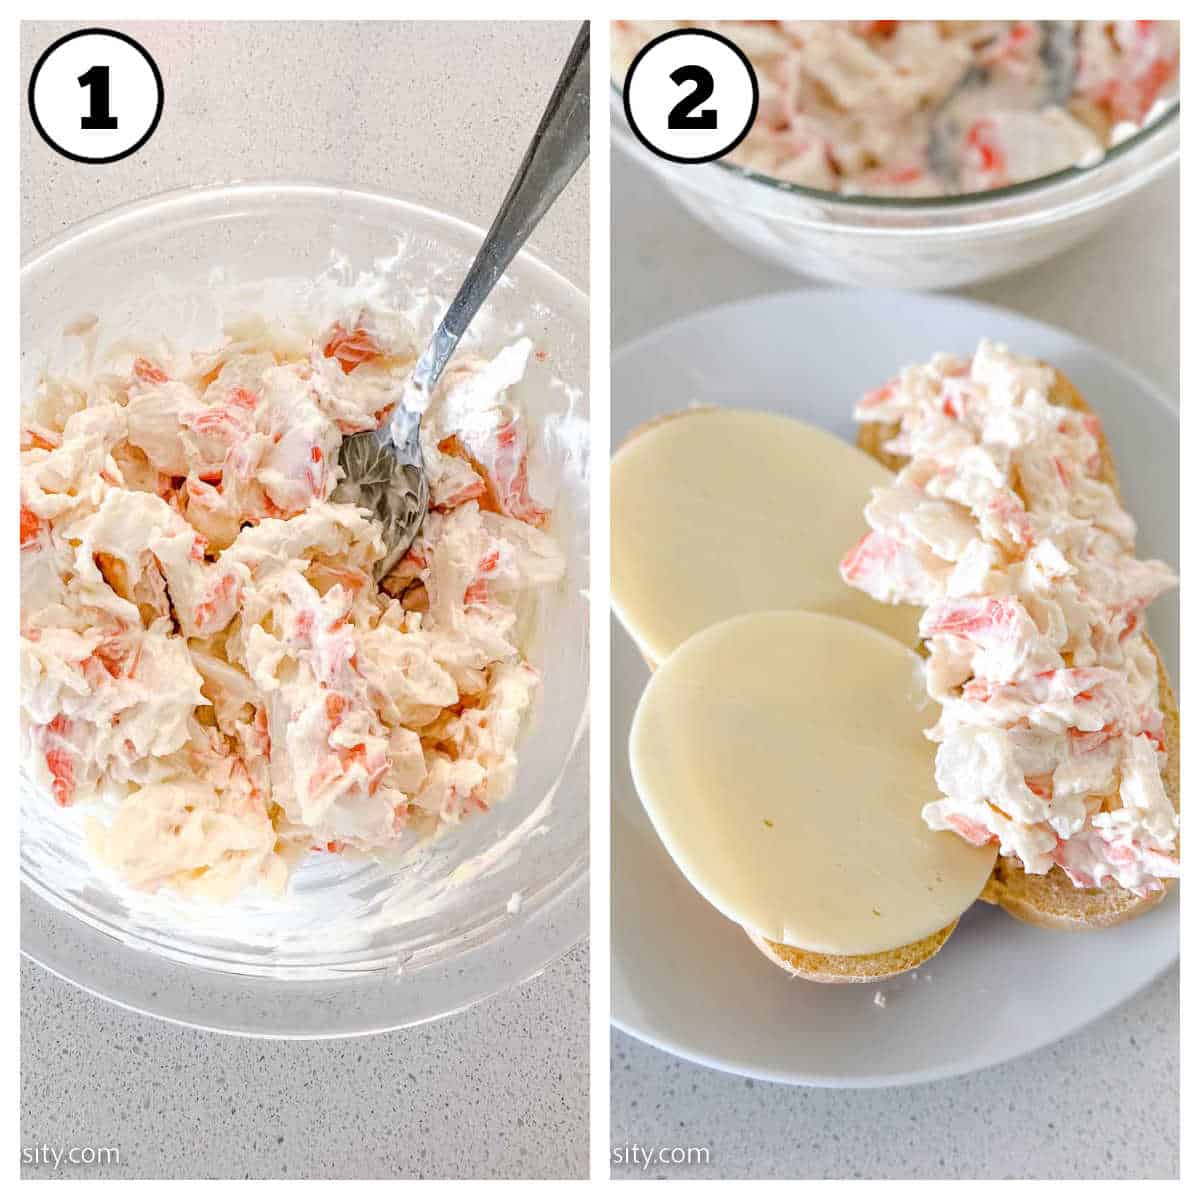 Steps 1-2 of how to make crab meat sandwich.